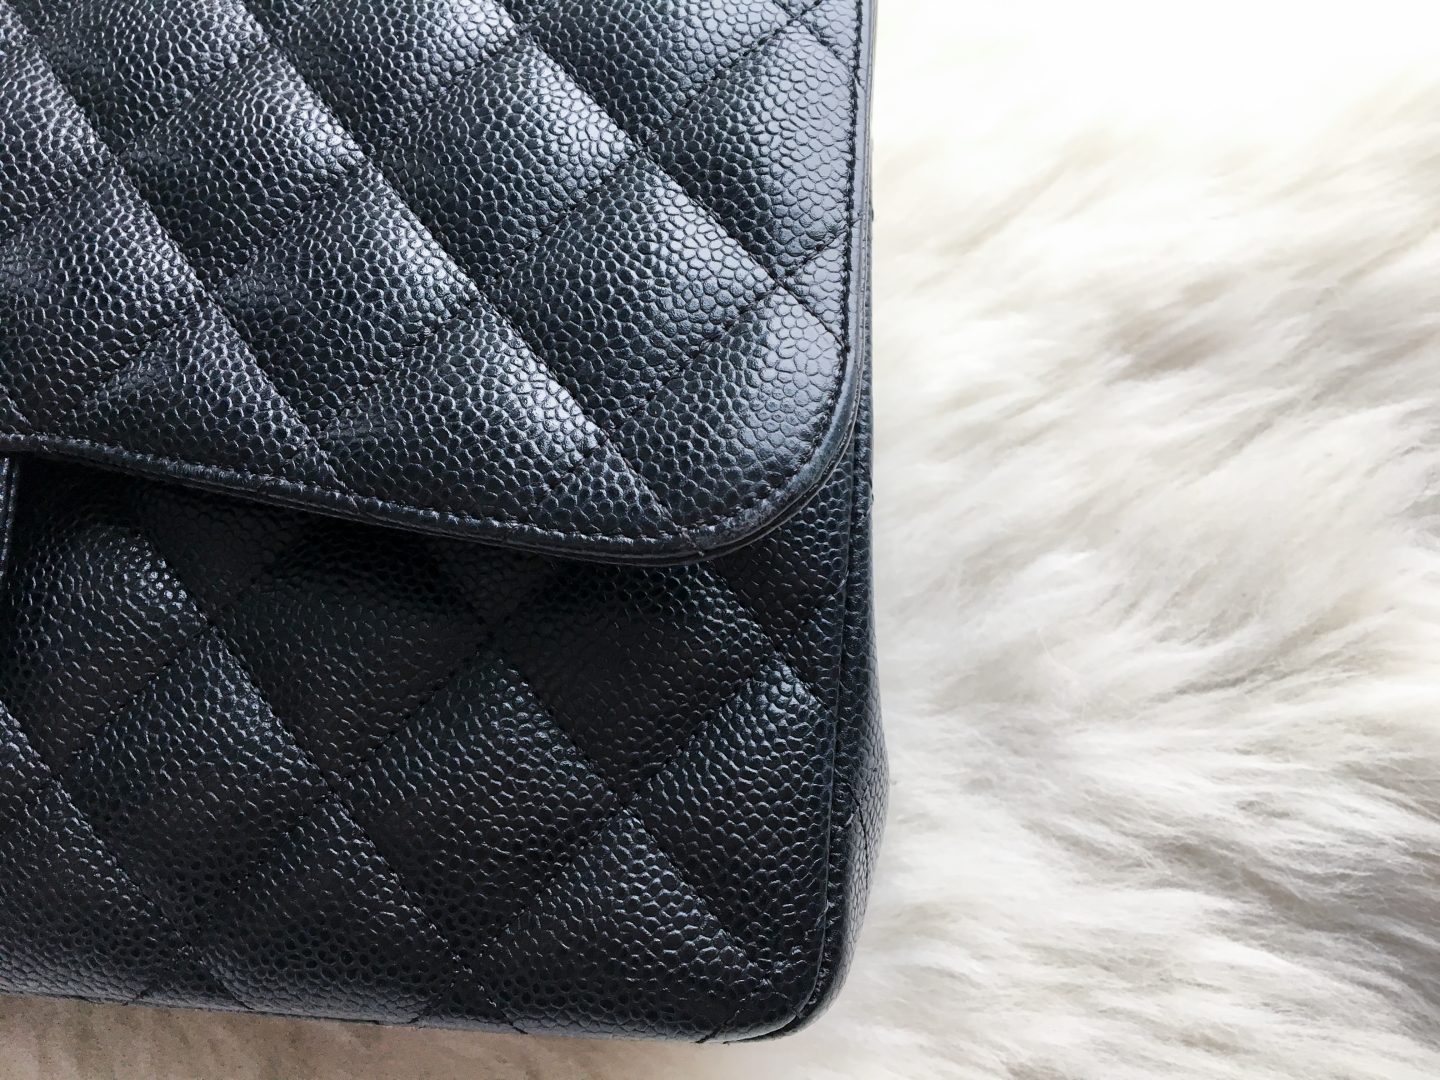 Chanel Classic Flap Bag Review, Mini Bag Collection 2022, Chanel Lambskin  Wear & Tear